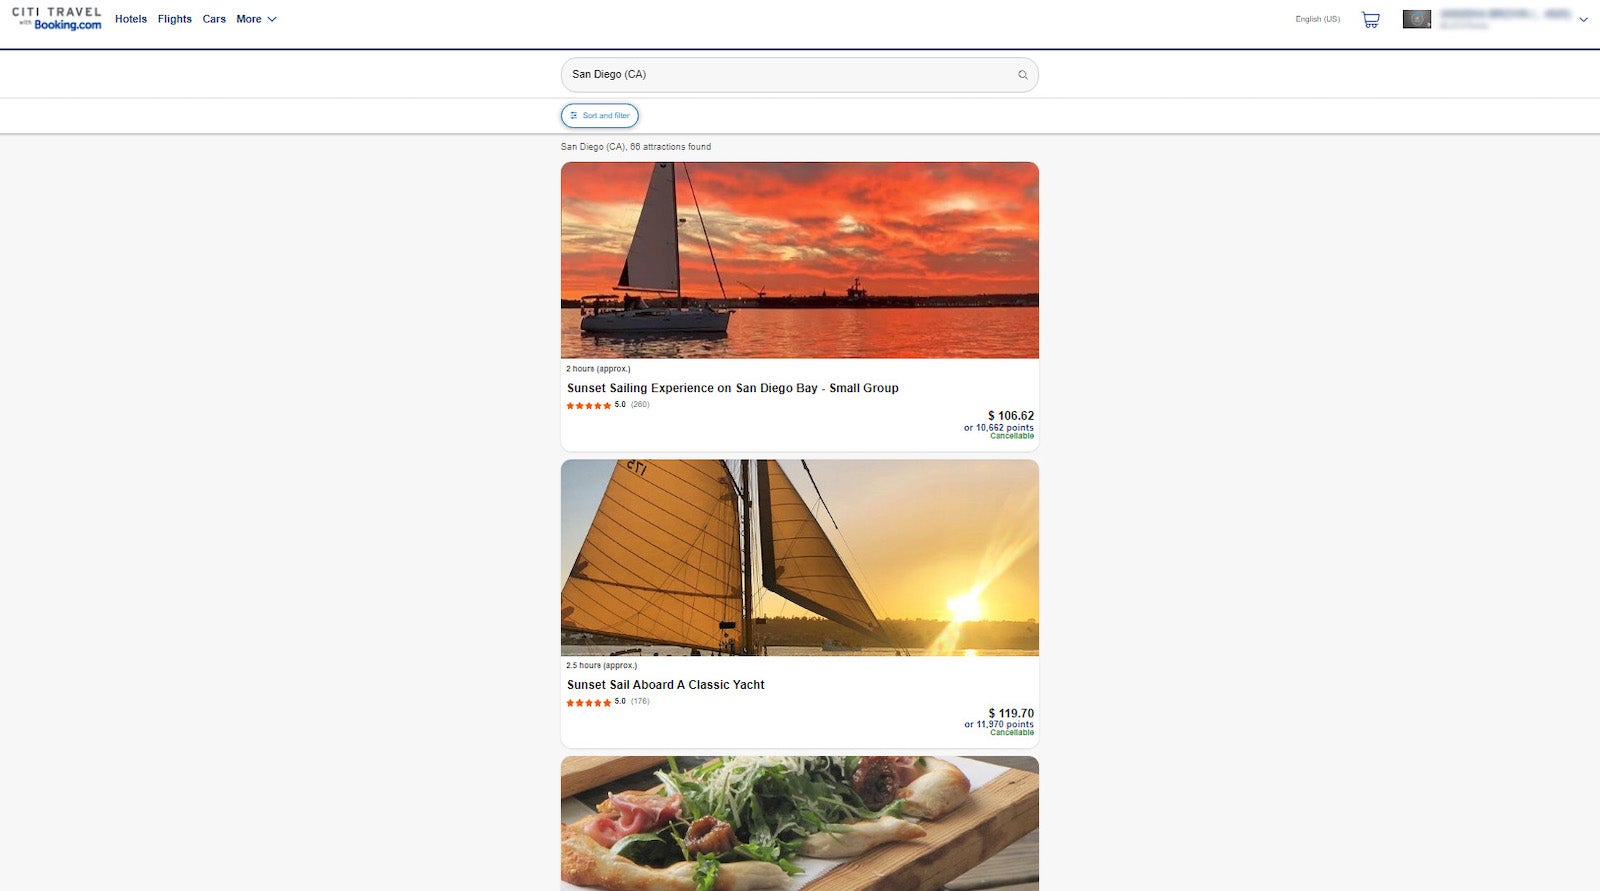 search results for activities in San Diego with the Citi travel portal